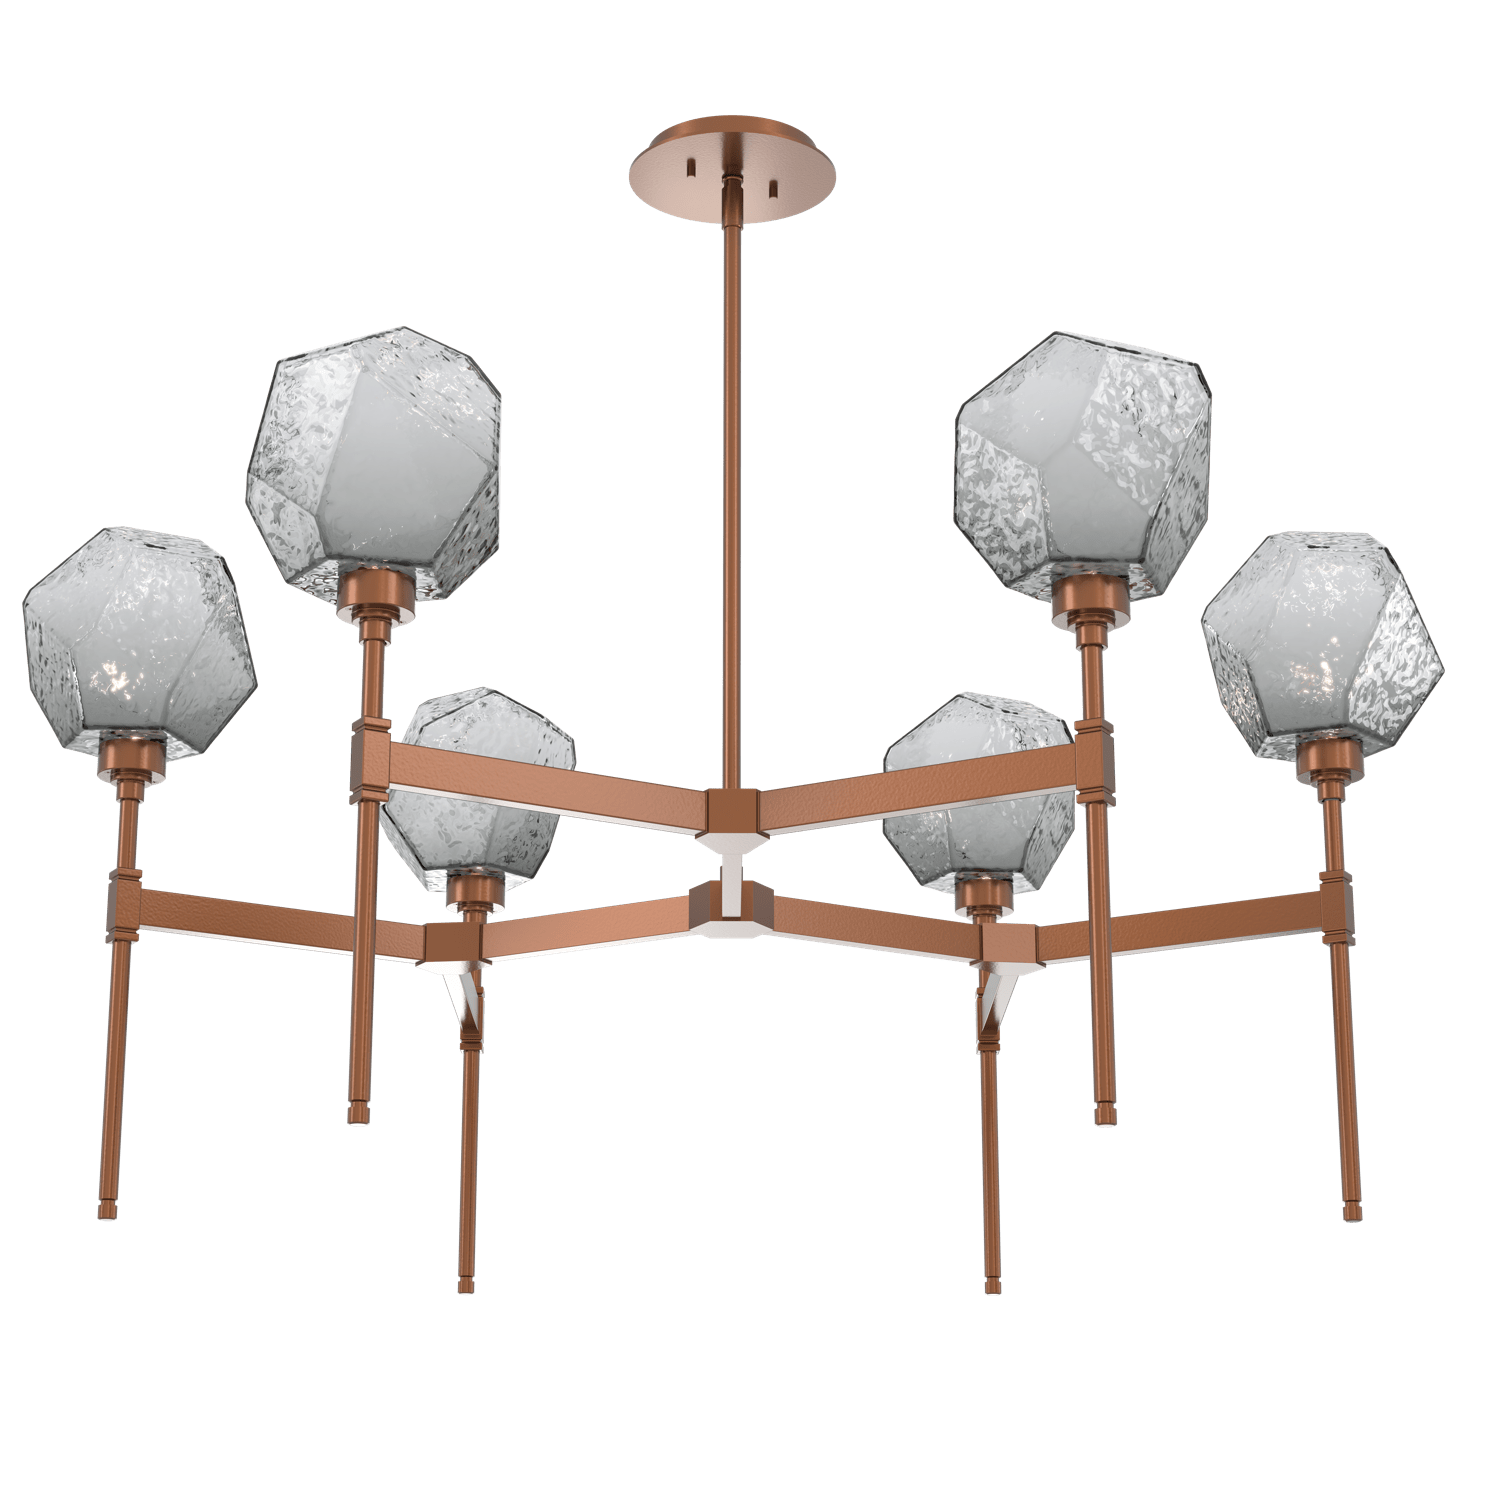 CHB0039-39-BB-S-Hammerton-Studio-Gem-round-belvedere-chandelier-with-burnished-bronze-finish-and-smoke-blown-glass-shades-and-LED-lamping